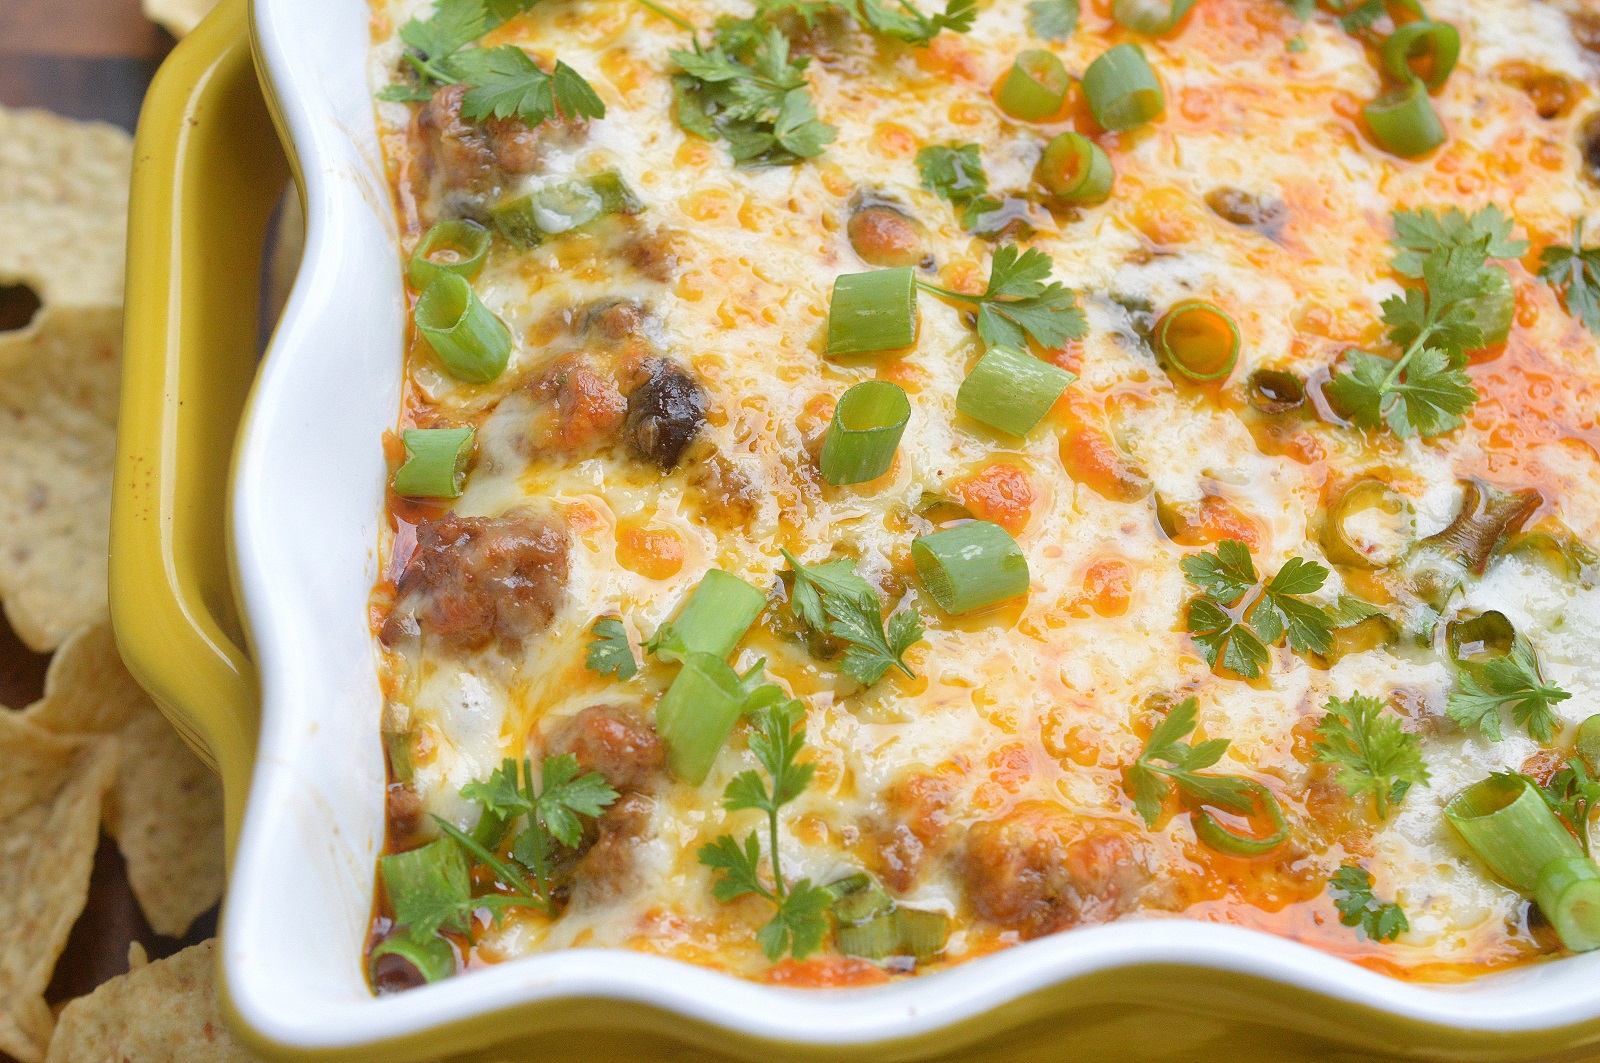 Cheesy Beef Enchilada Dip! Easy to make, gluten free and perfect for Game Day Grub!